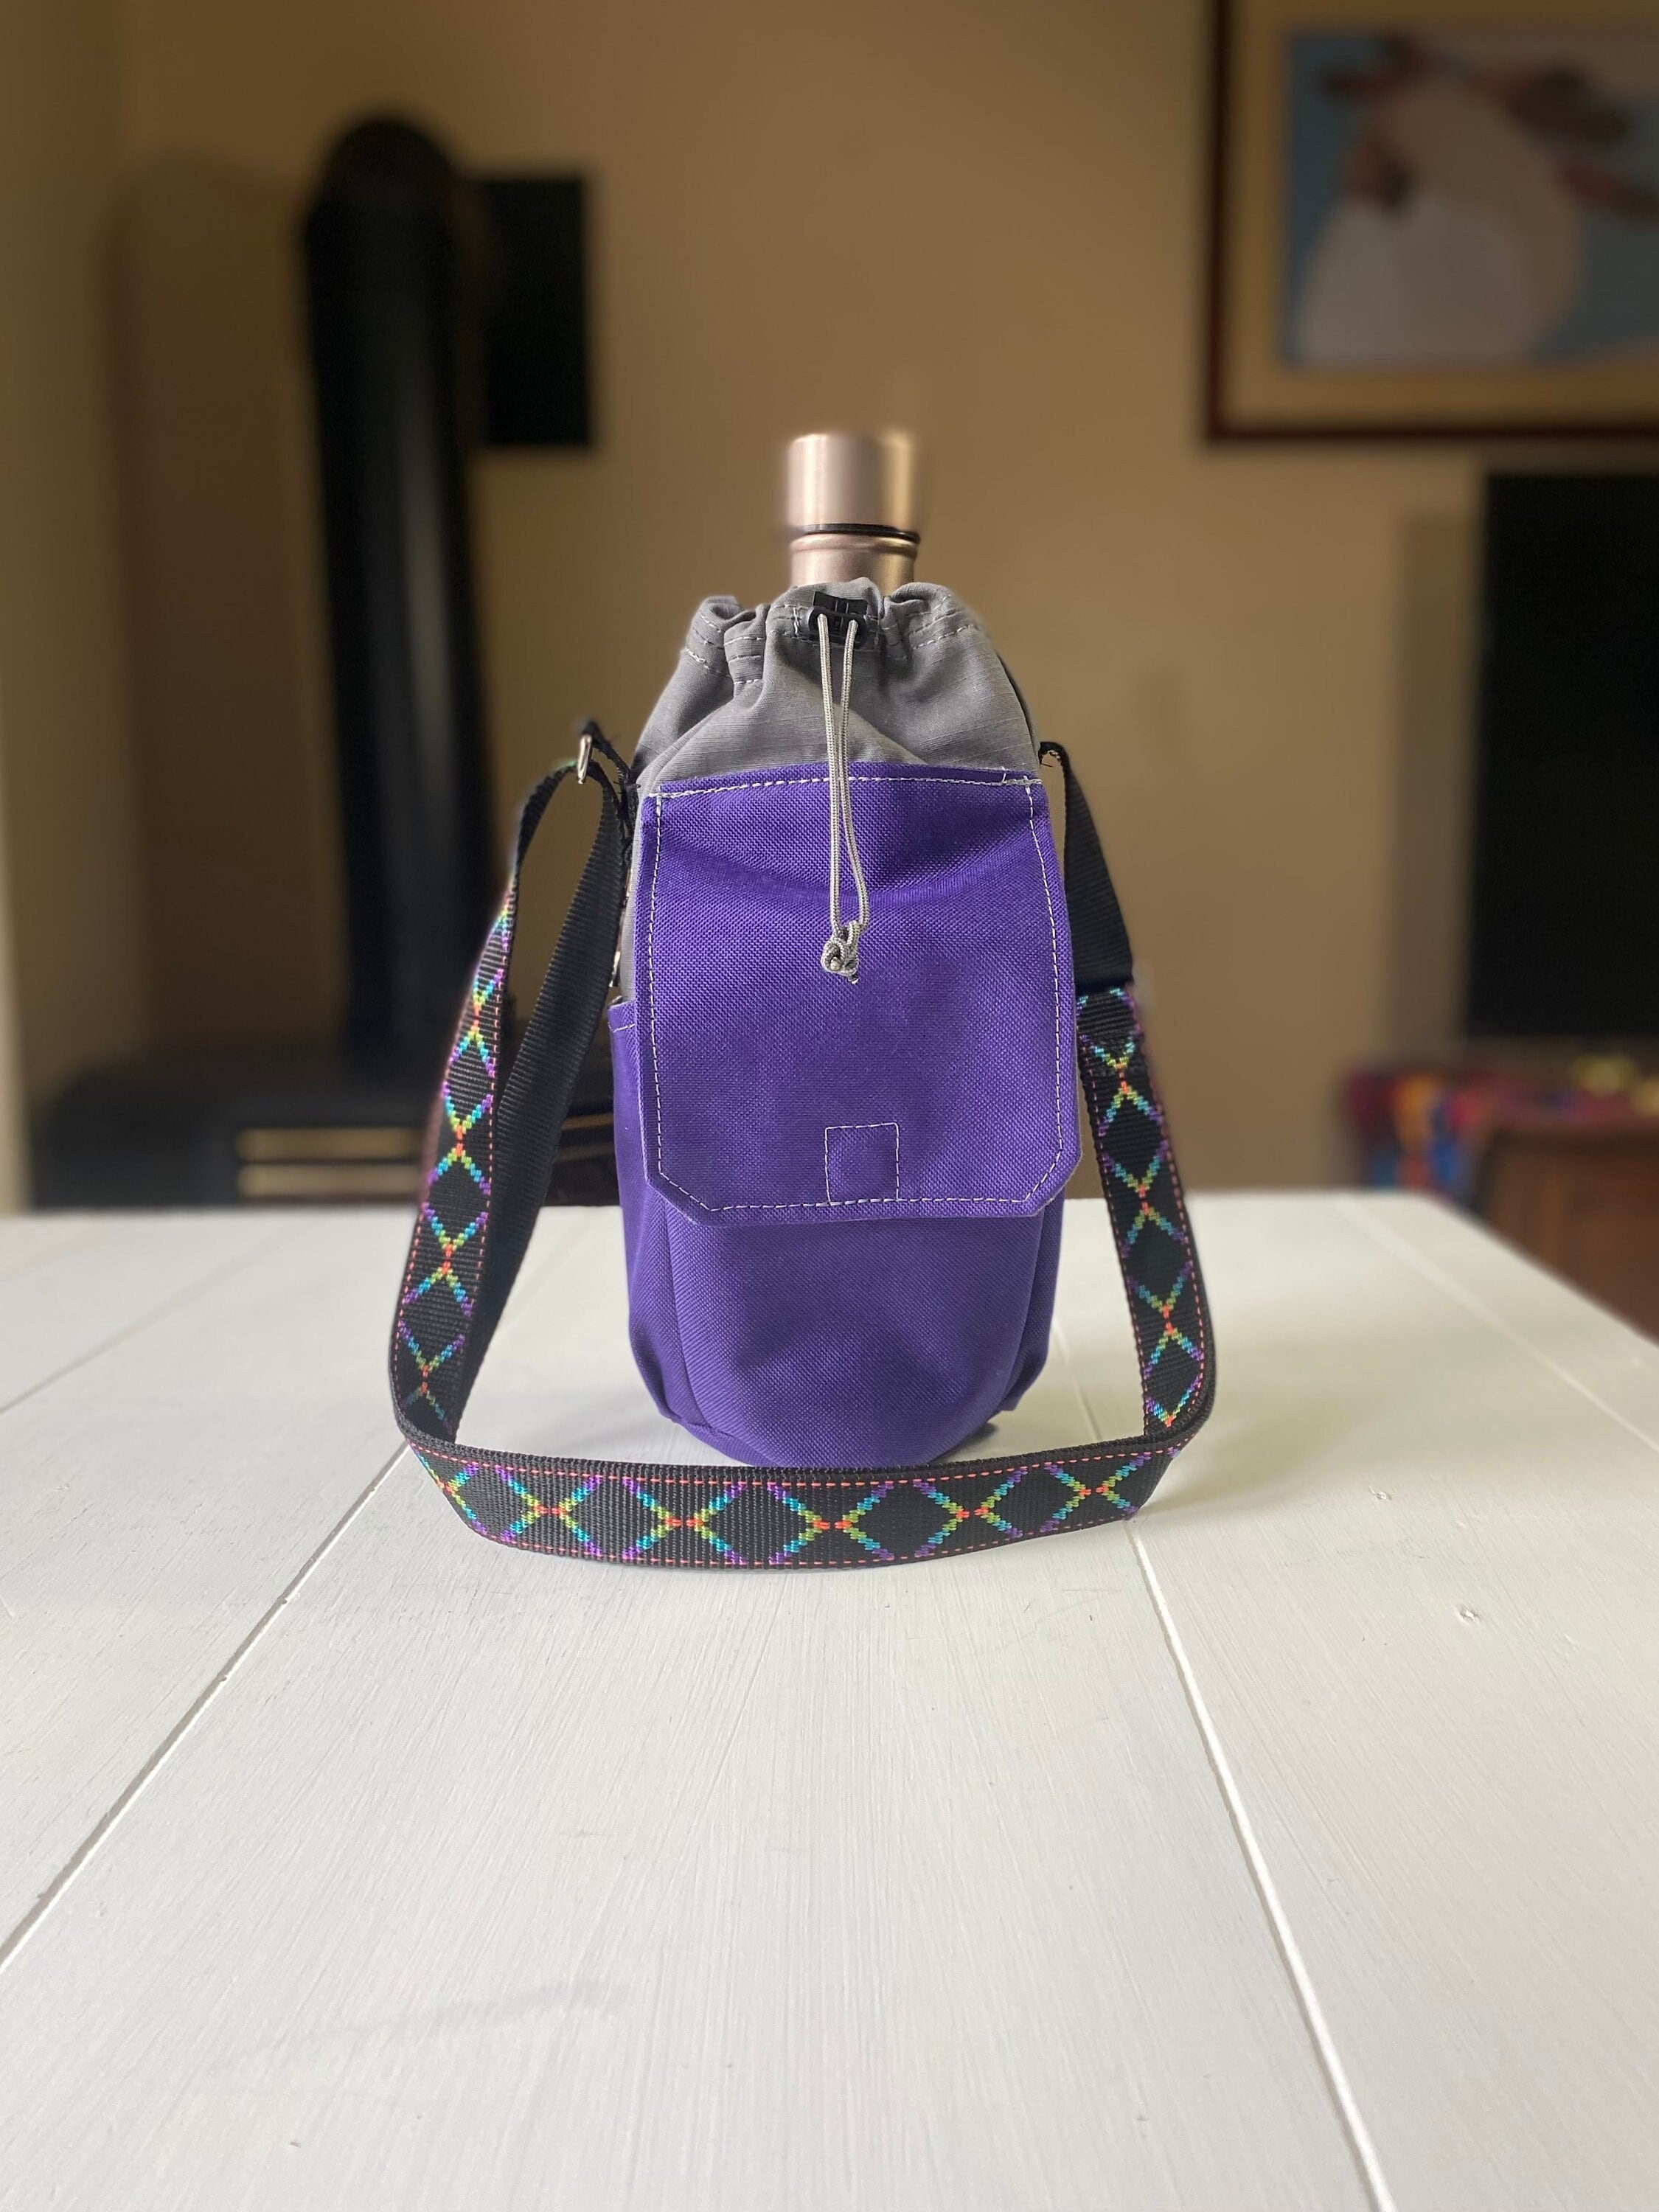 Handmade Cross Body Water Bottle Bag, Sling Bag with Wallet Pockets, Gift to benefits Friends to The Forlorn Rescue